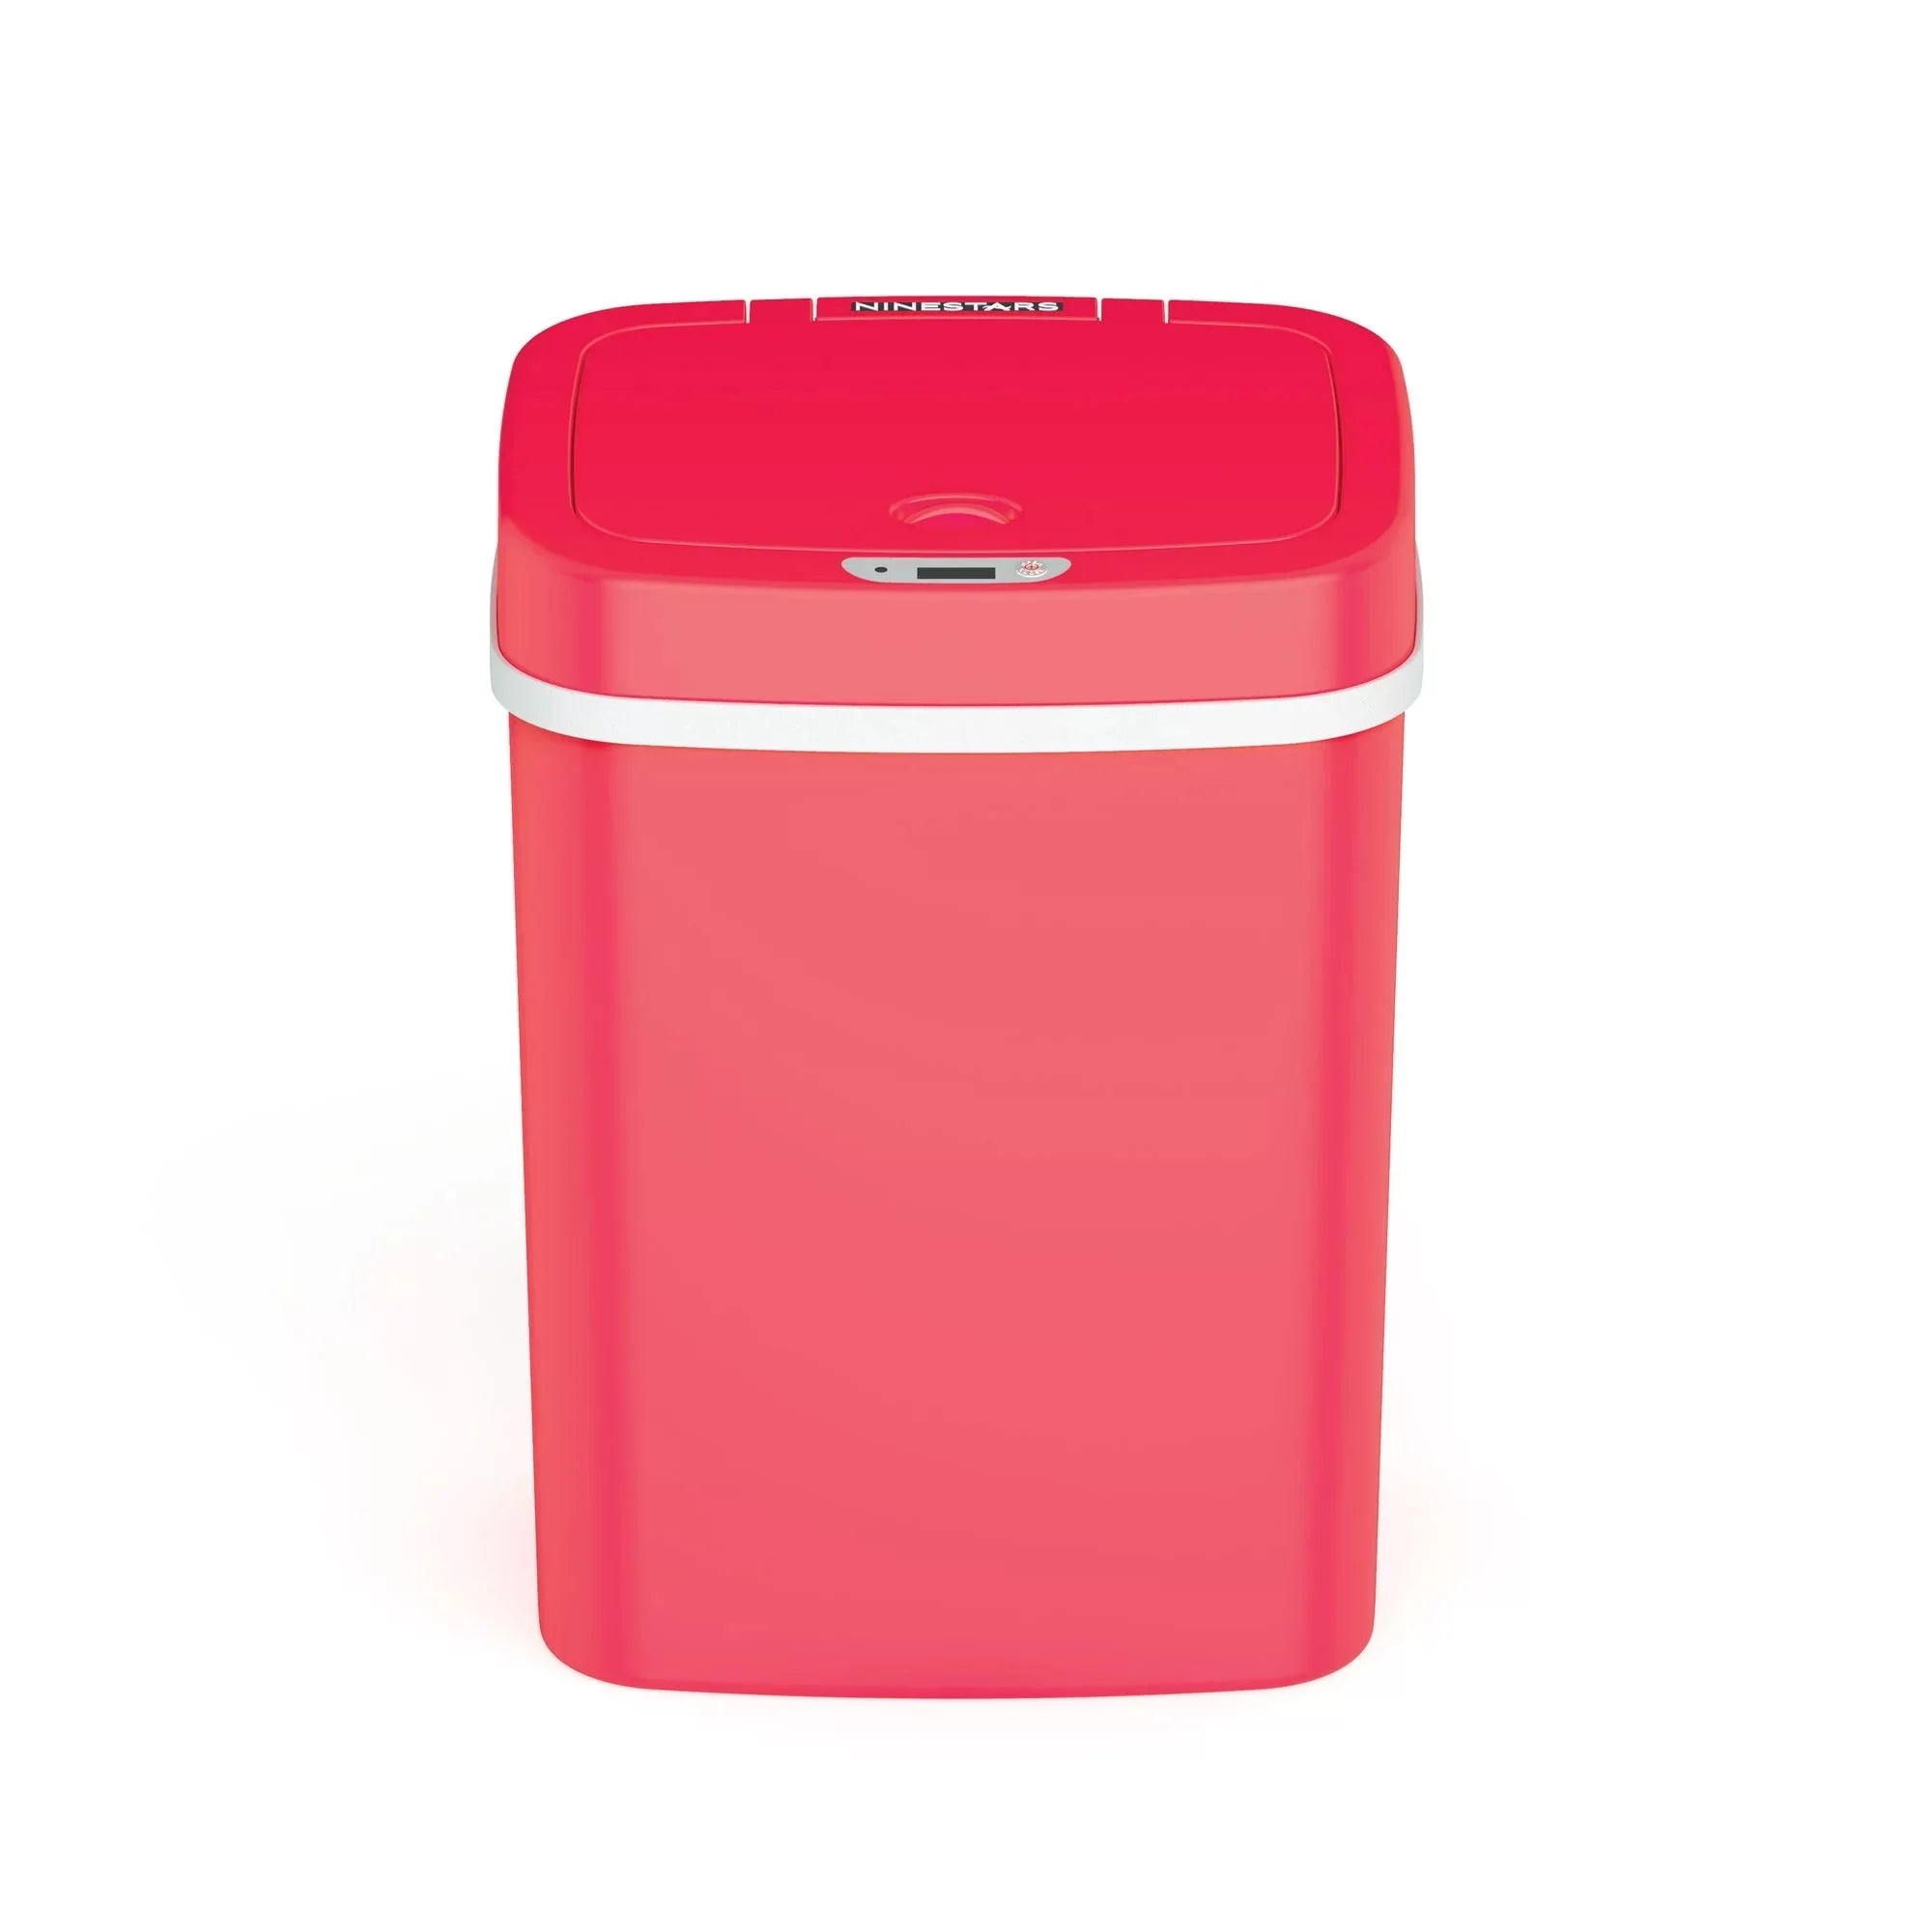 Wholesale prices with free shipping all over United States Nine Stars 3.2 Gallon Trash Can, Plastic Touchless Bathroom Trash Can, Rose - Steven Deals